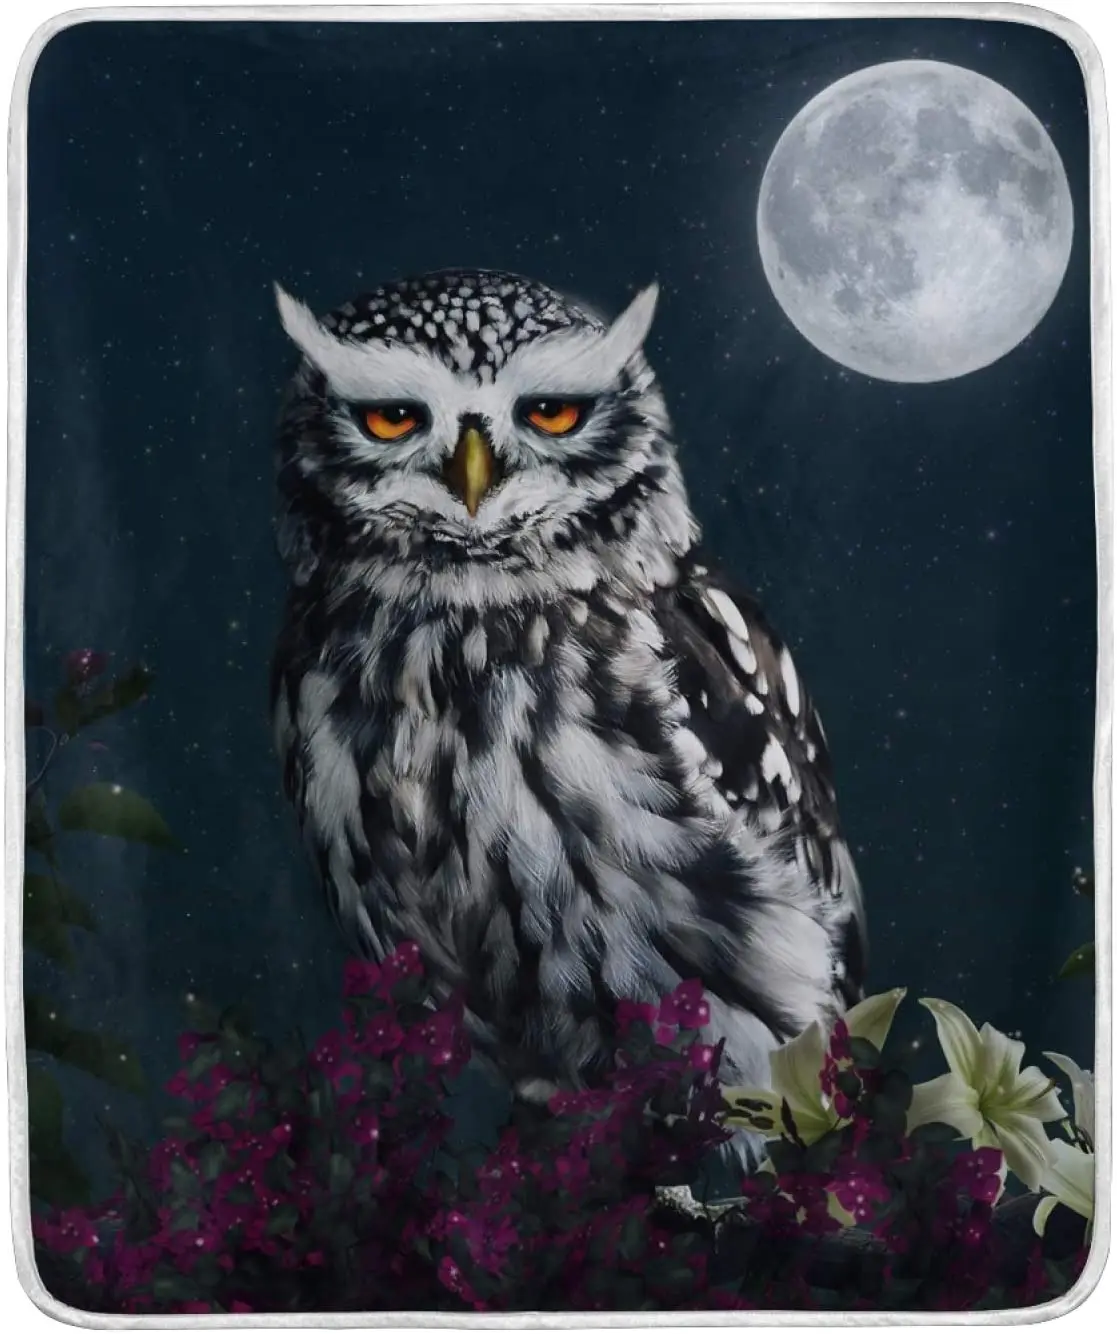 

All Season Warm Throws and Blankets Owl in The Night with Full Moon Crystal Velvet Blanket Throws for Couch Soft Decor Blanket f